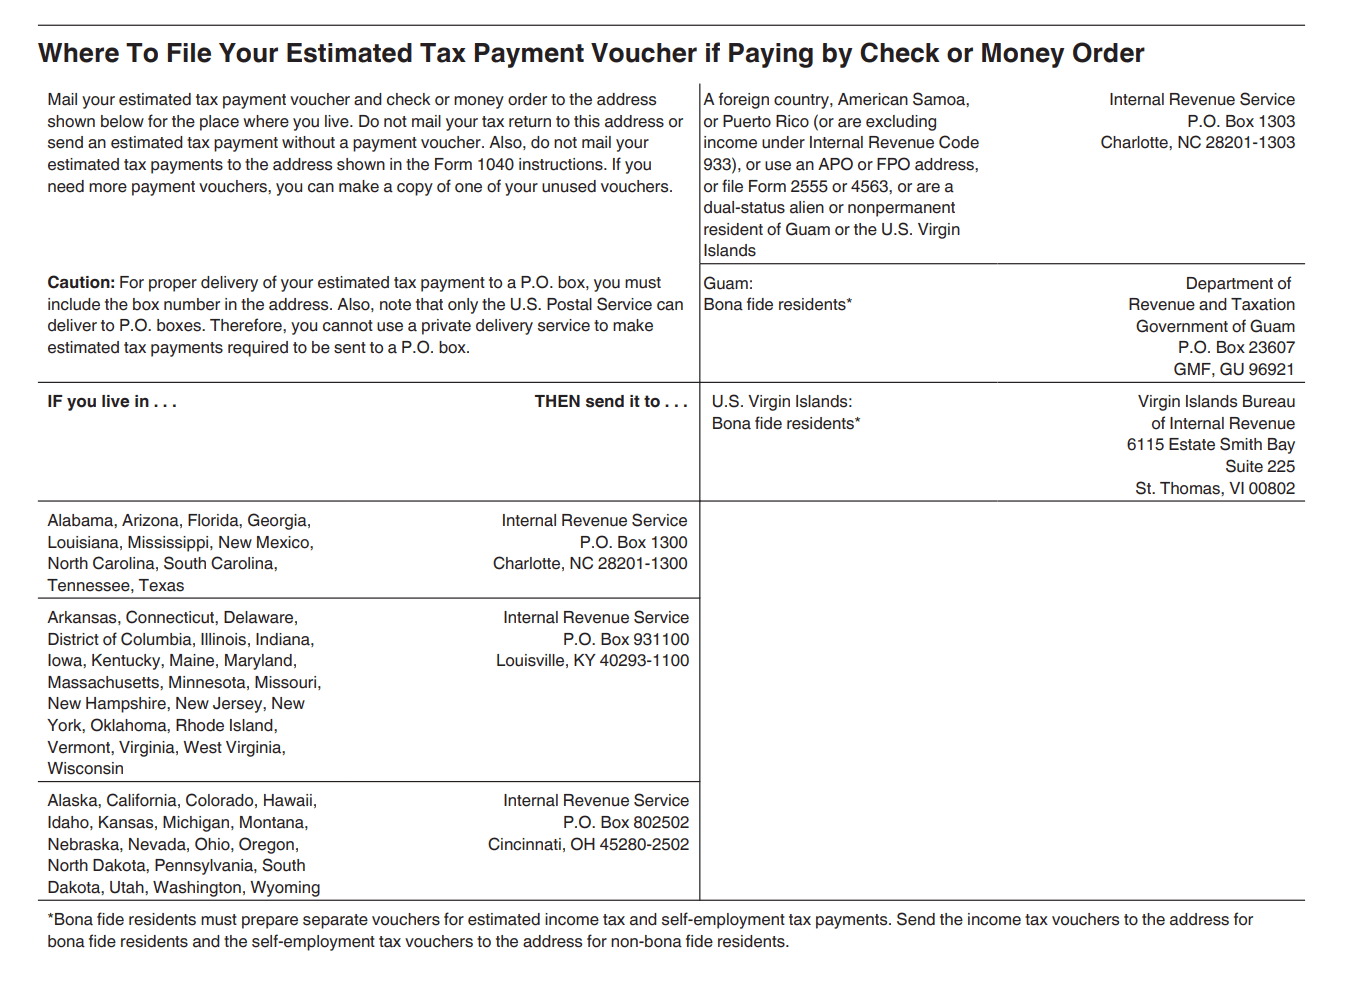 where-to-file-your-estimated-tax-payment-voucher-form-1040-es.png